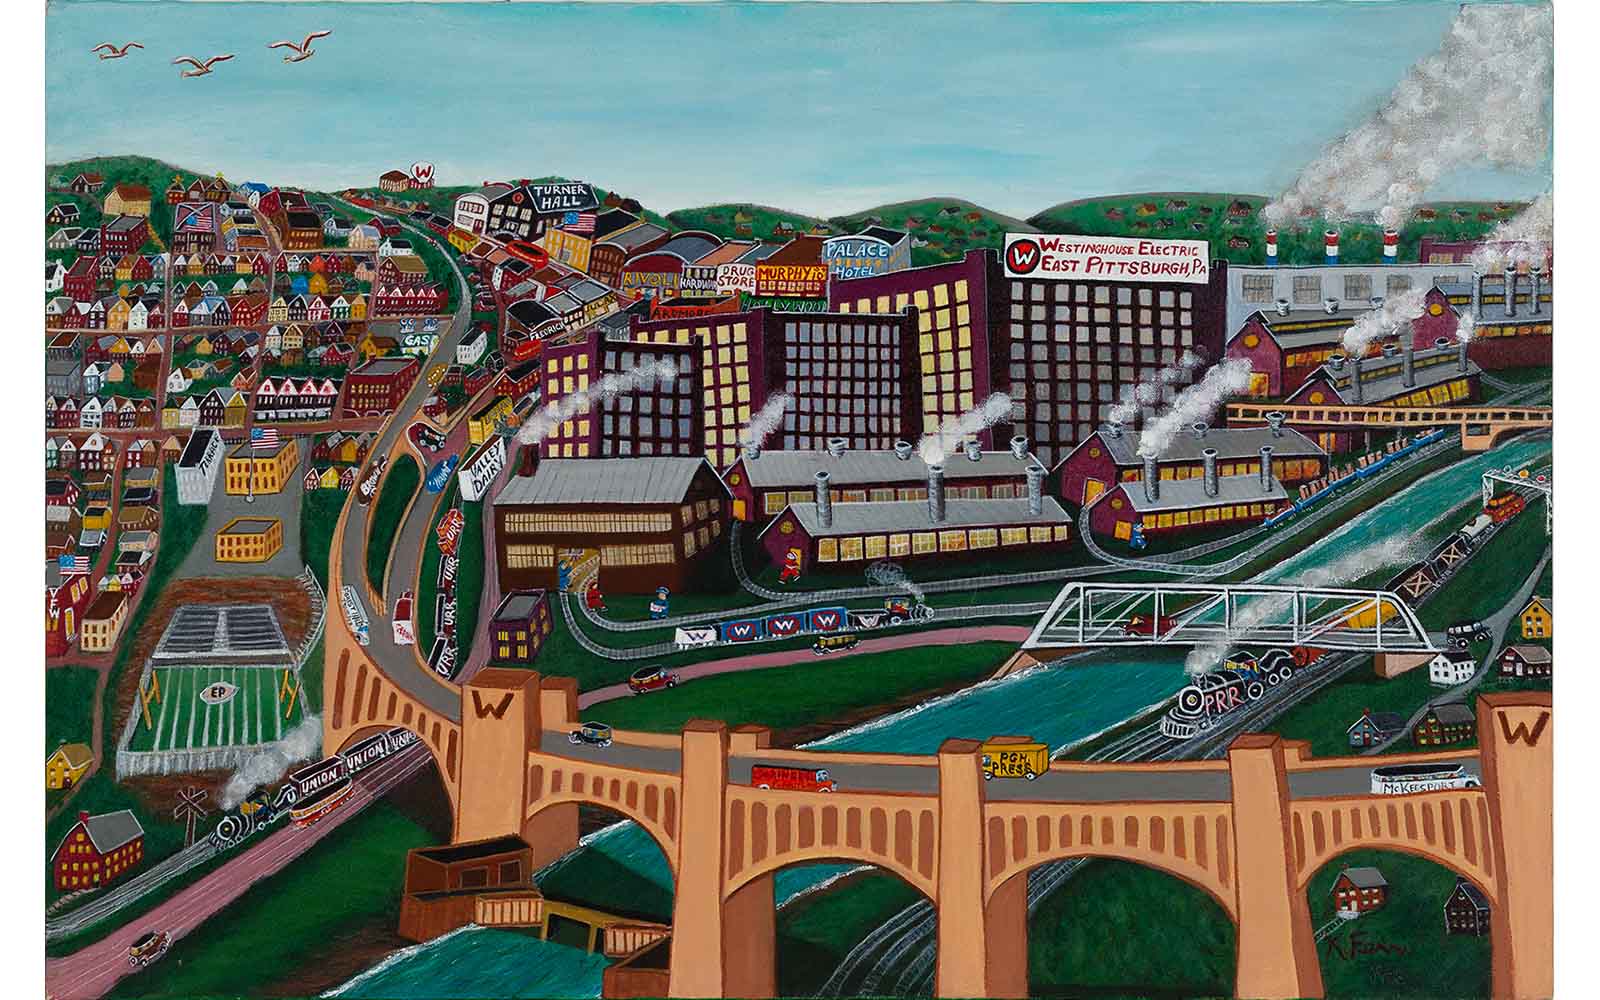 A painting of the Westinghouse Bridge and East Pittsburgh